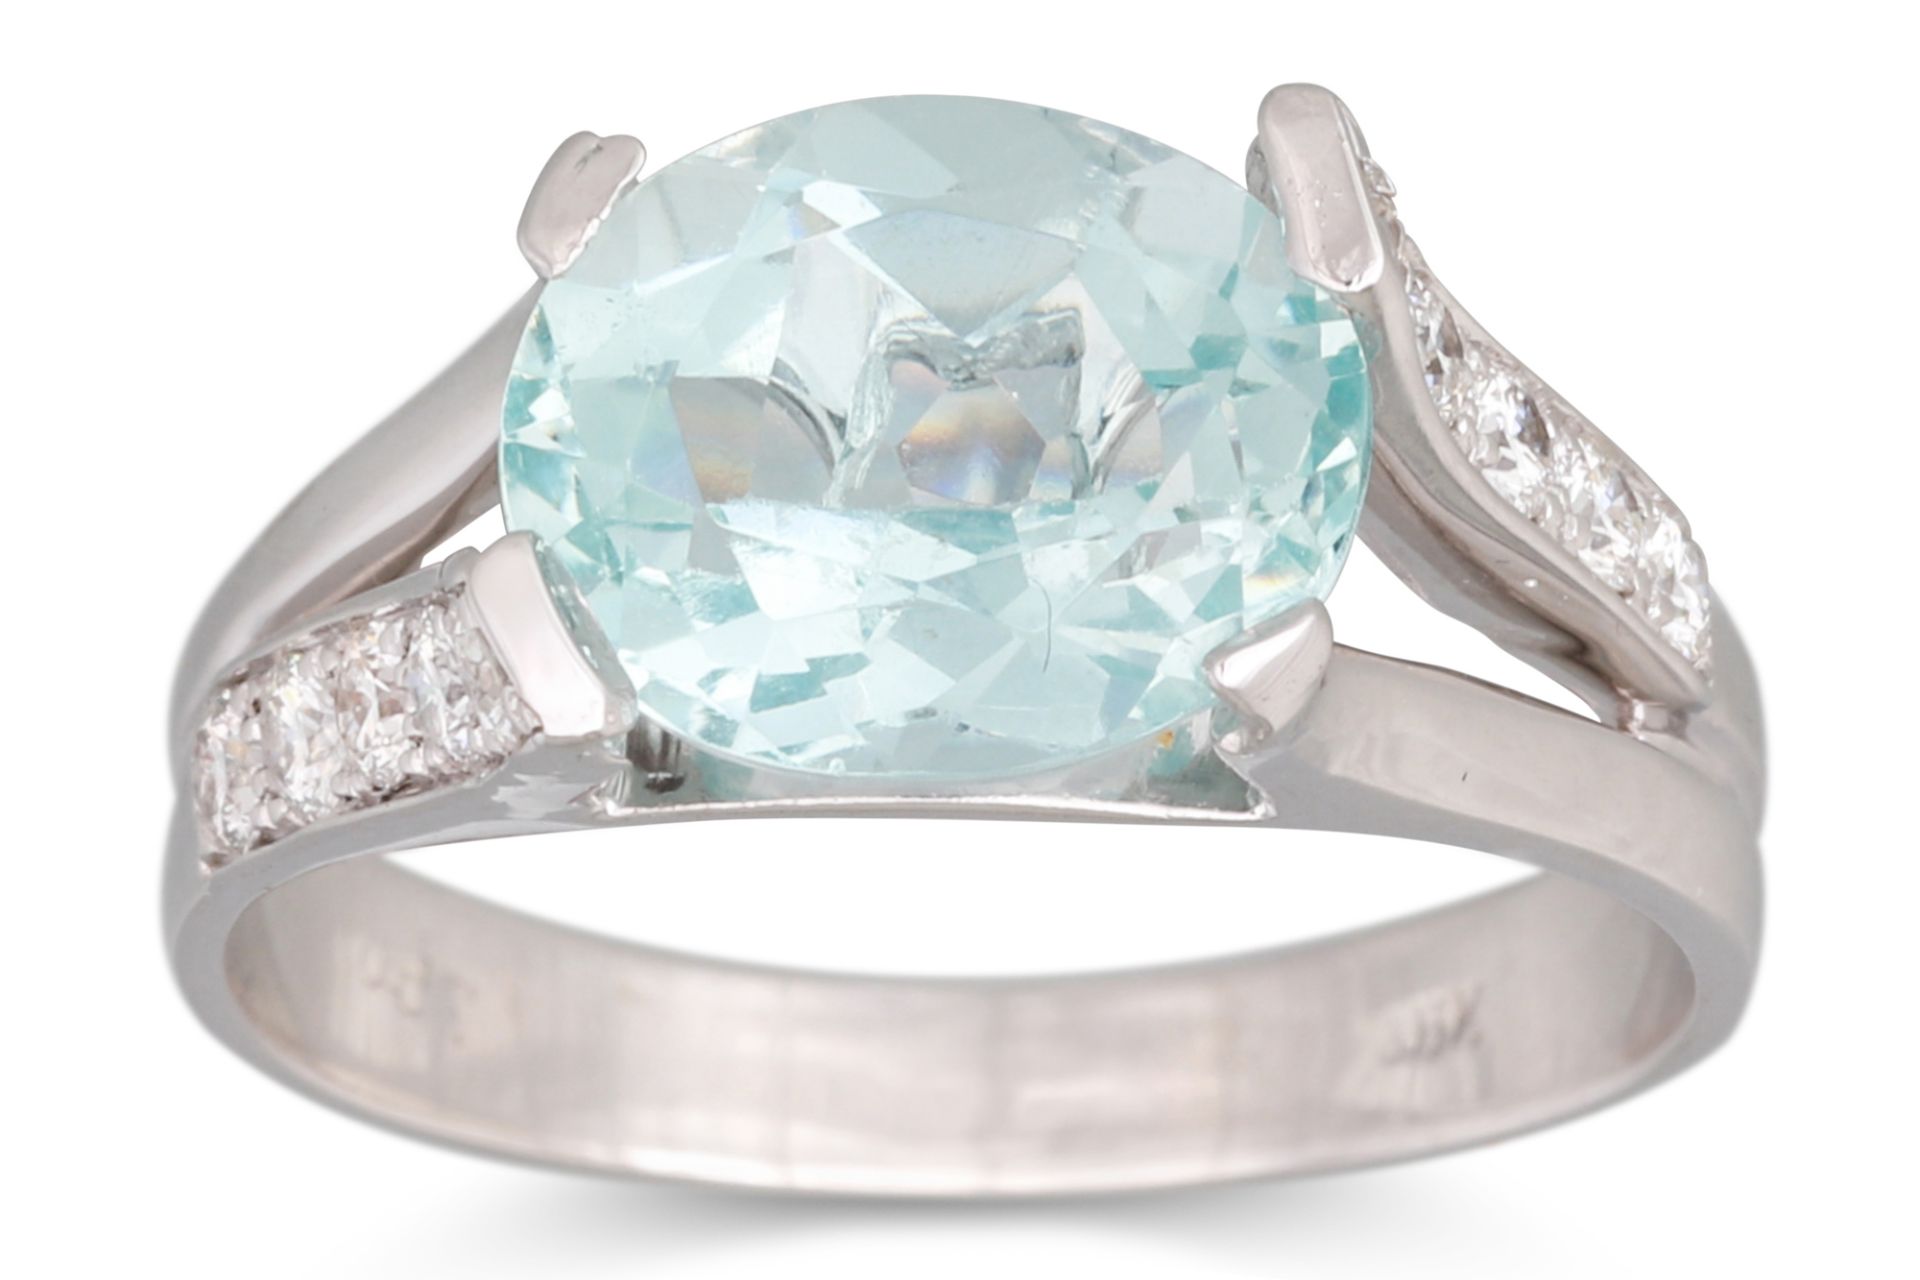 AN AQUAMARINE AND DIAMOND RING, the oval aquamarine to diamond shoulders, mounted in 18ct white